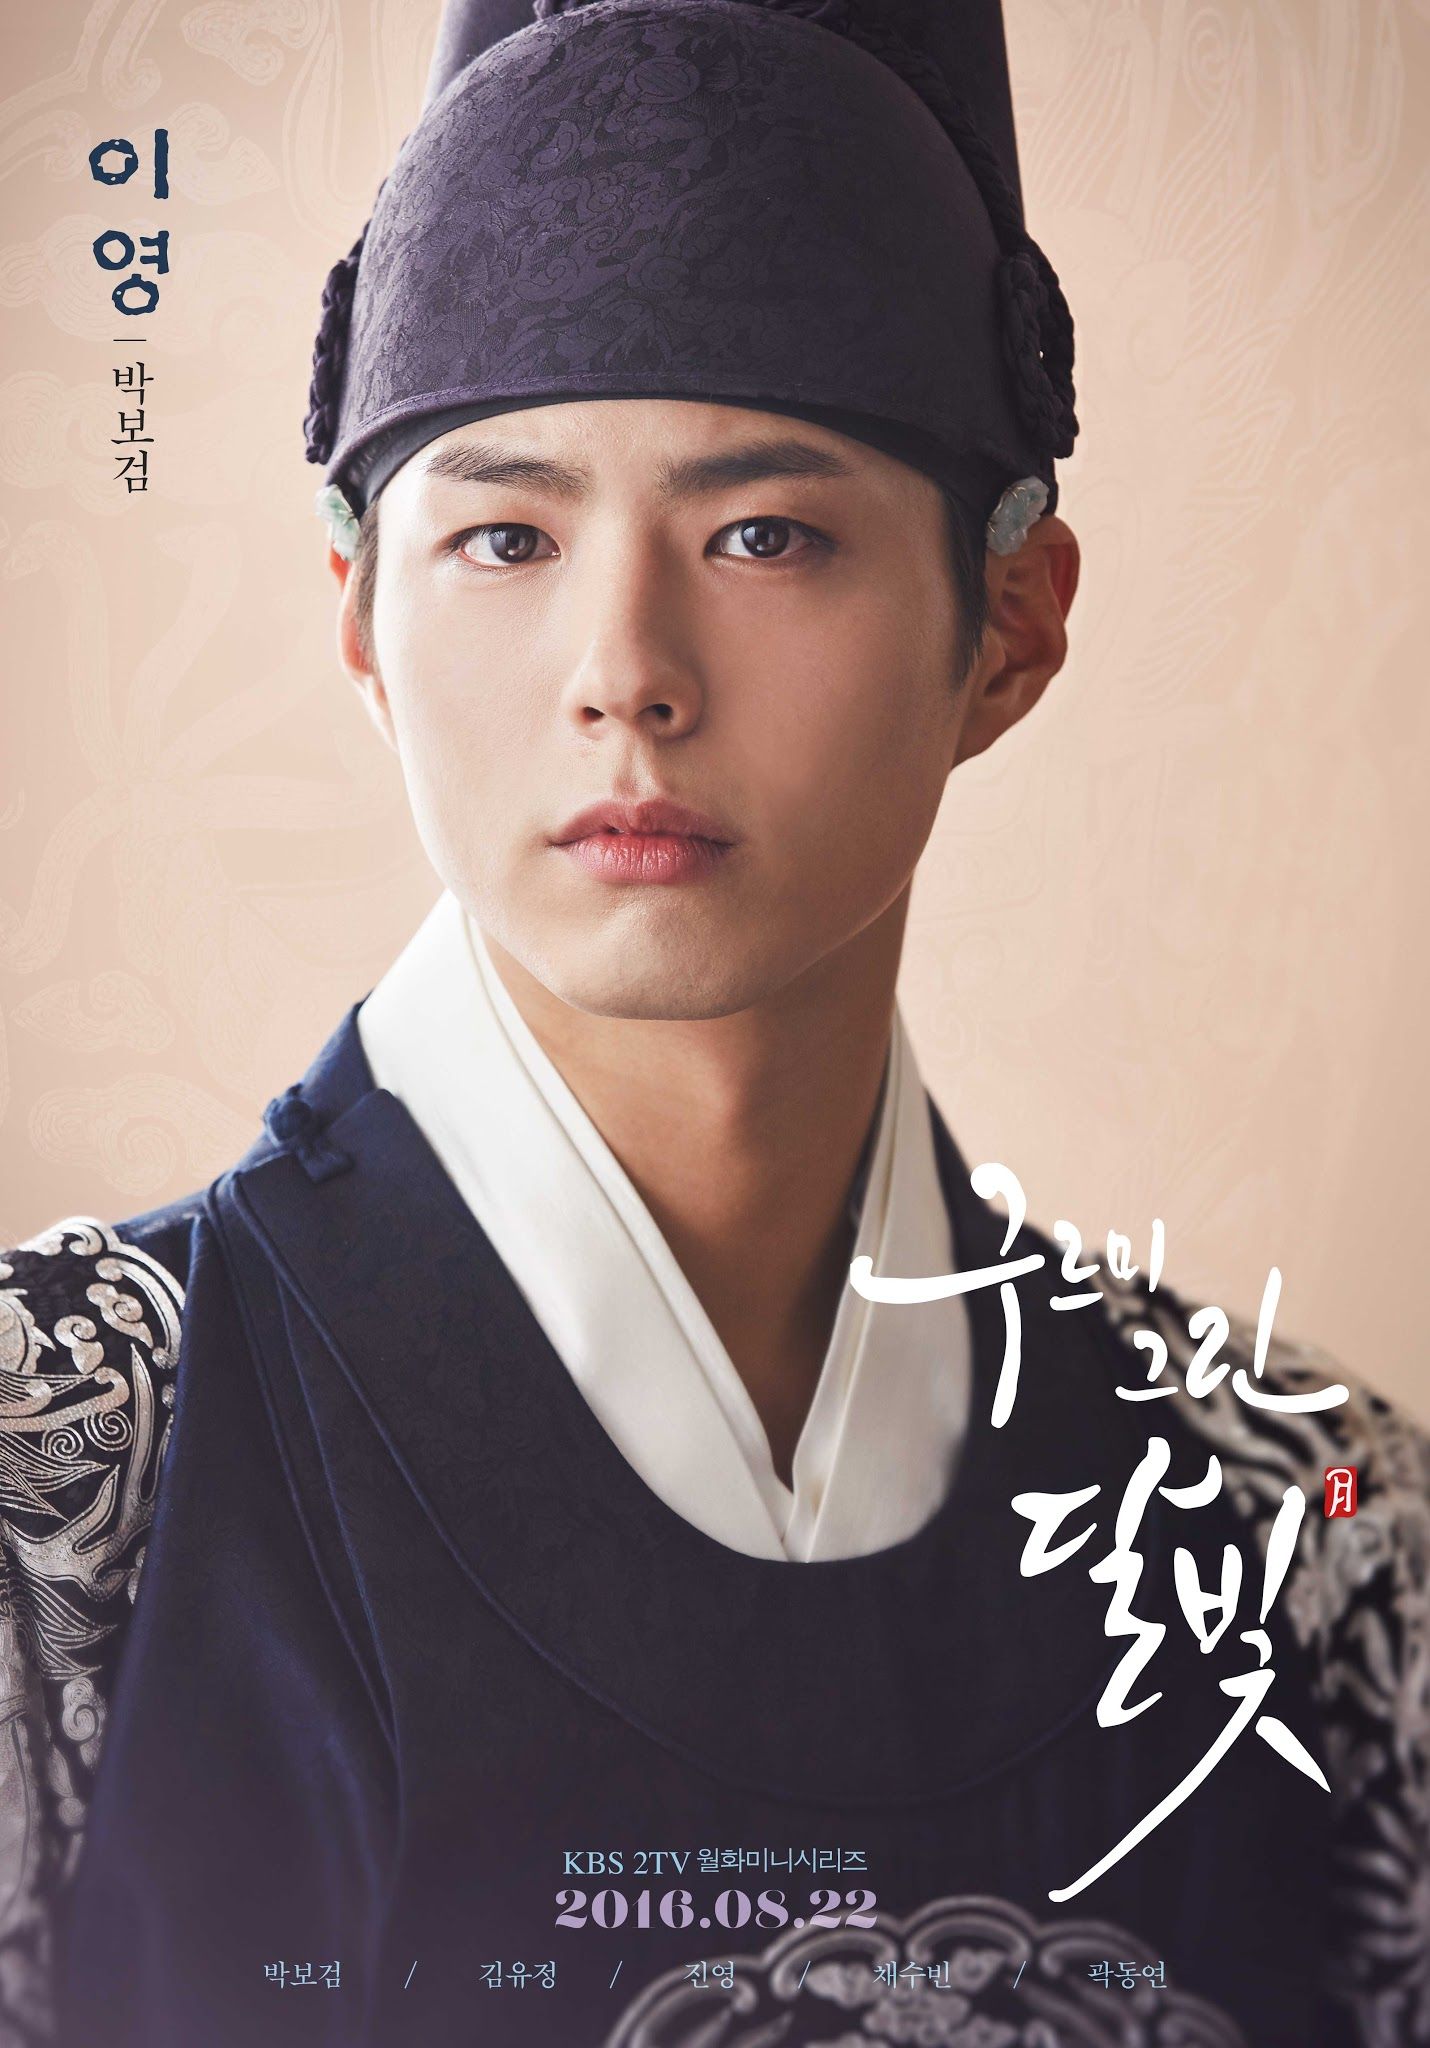 Park Bo Gum Android IPhone Wallpaper KPOP Image